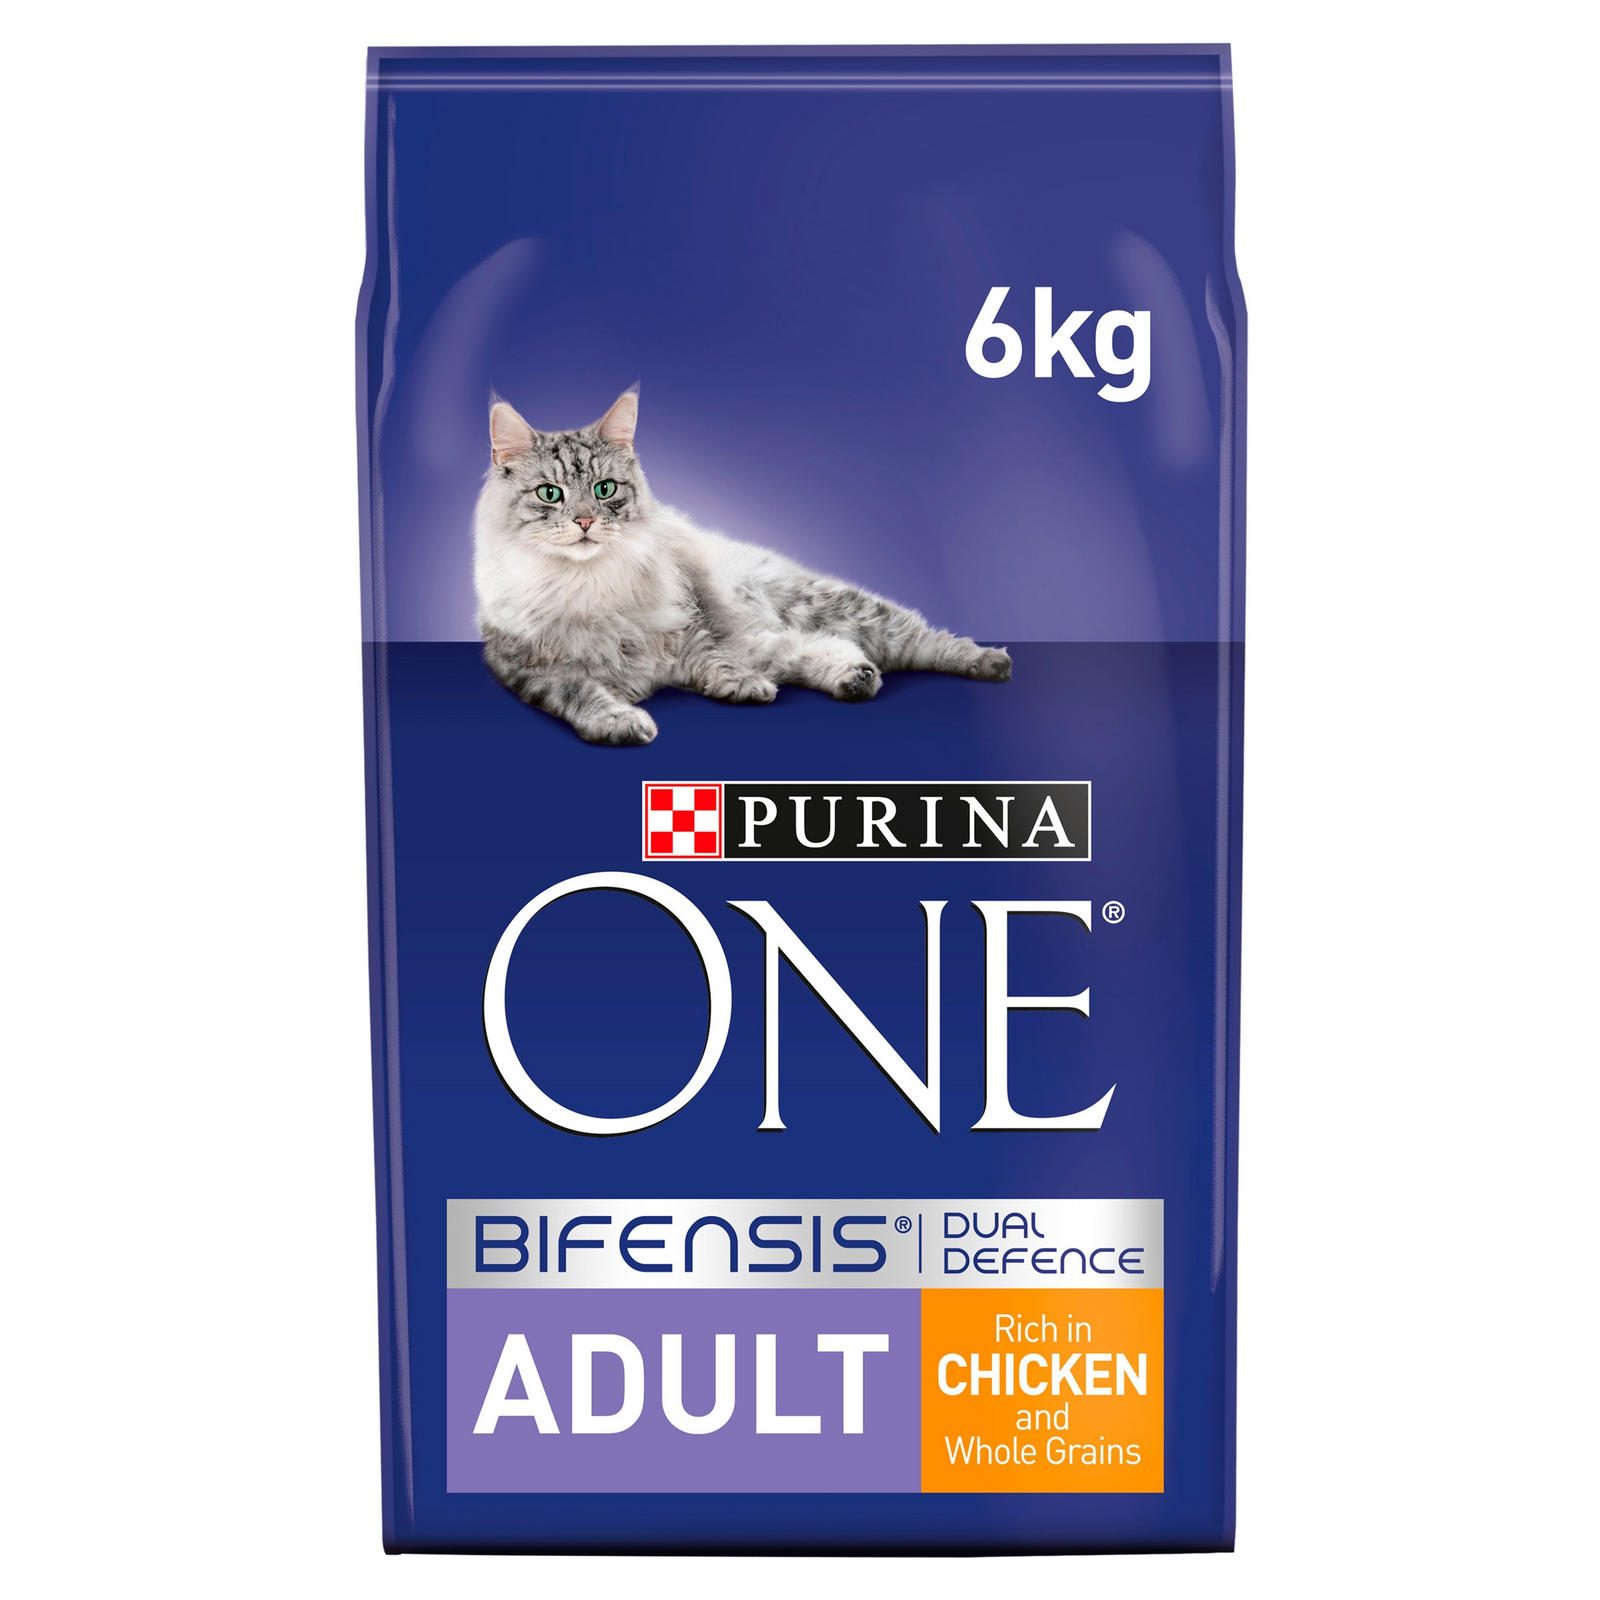 Purina ONE Adult Dry Cat Food Chicken and Wholegrains 6kg Pet Food